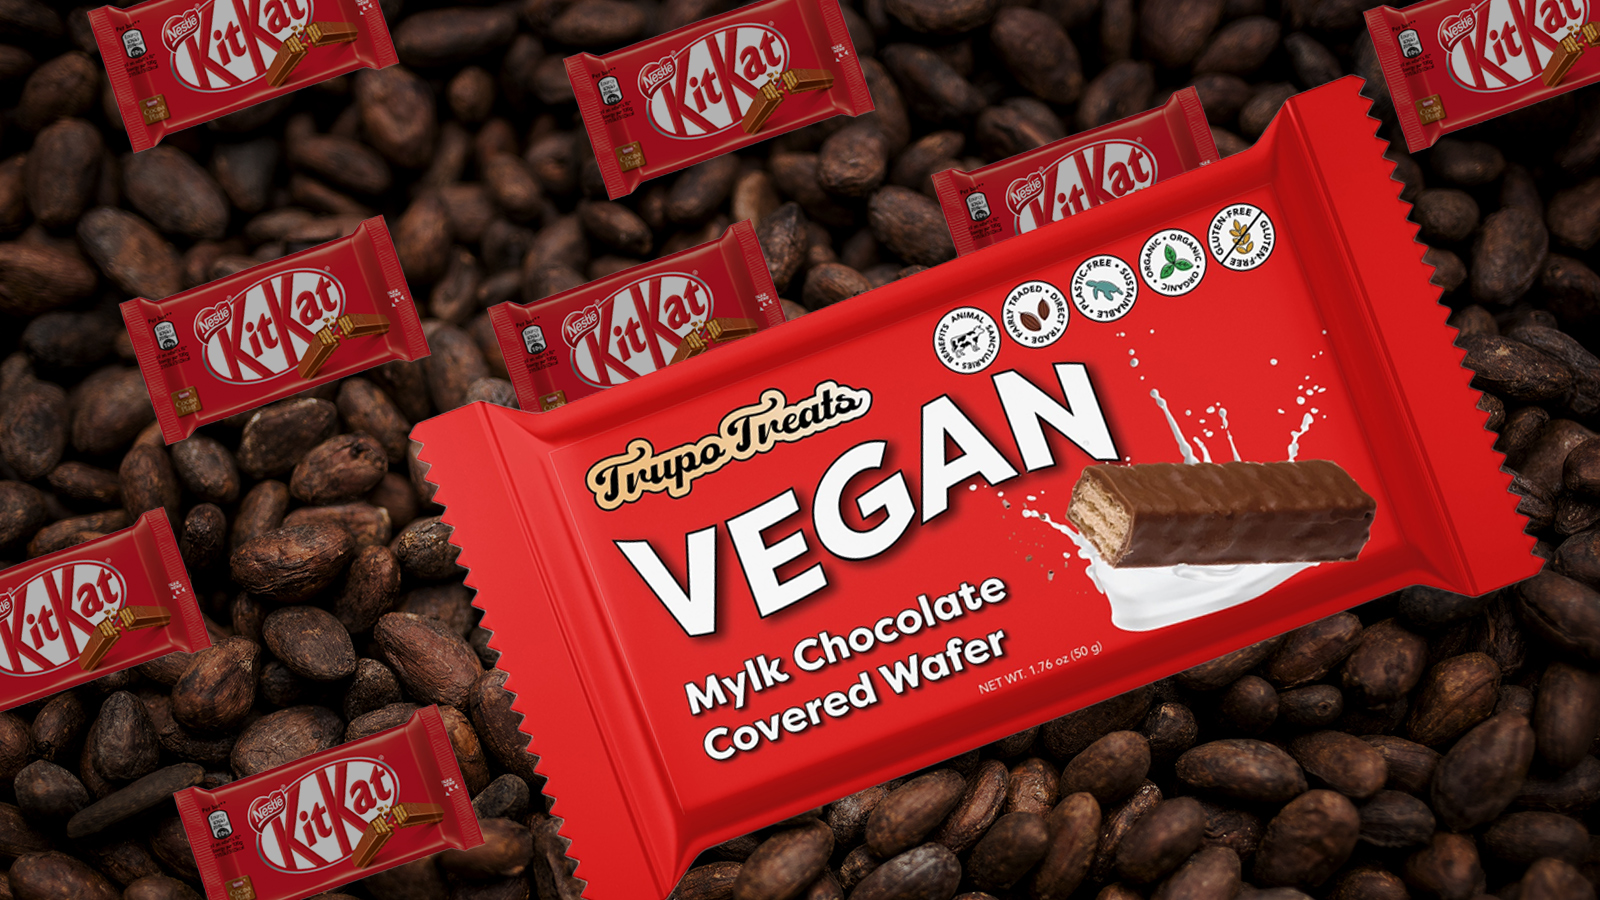 Vegan Alternative To 'KitKat' And 'Twix' Launches in US, Rivals Nestlé And Mars. Plant Based News